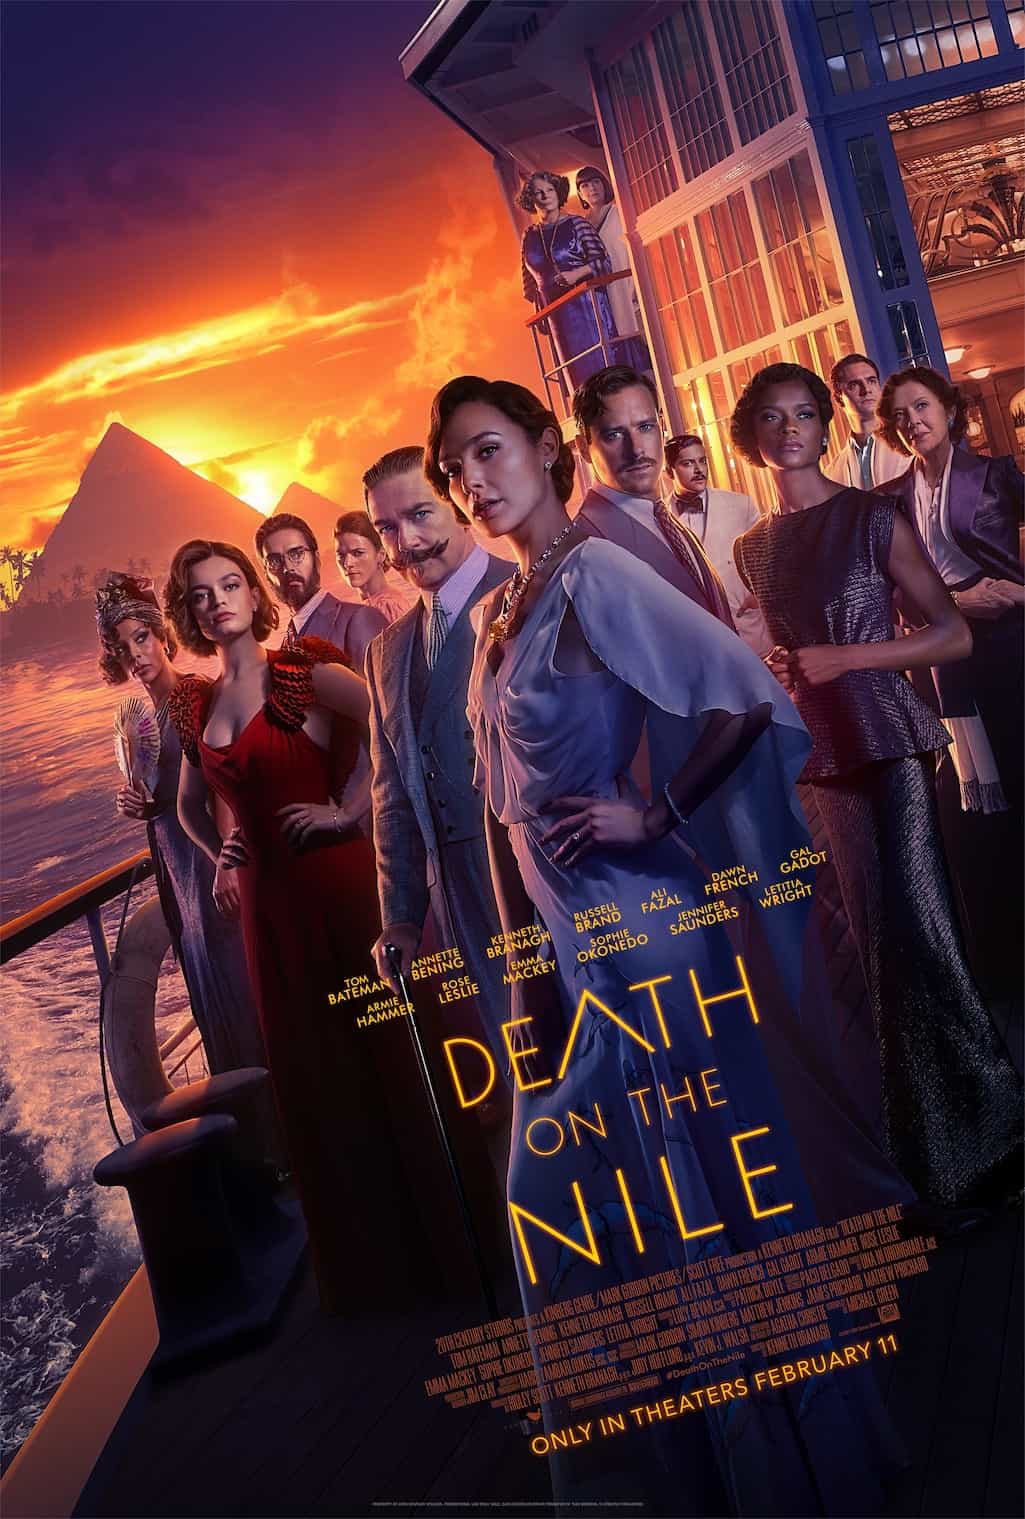 US Box Office Weekend Report 11th - 13th February 2022: Death on the Nile wins the box office over the traditionally quiet Super Bowl weekend